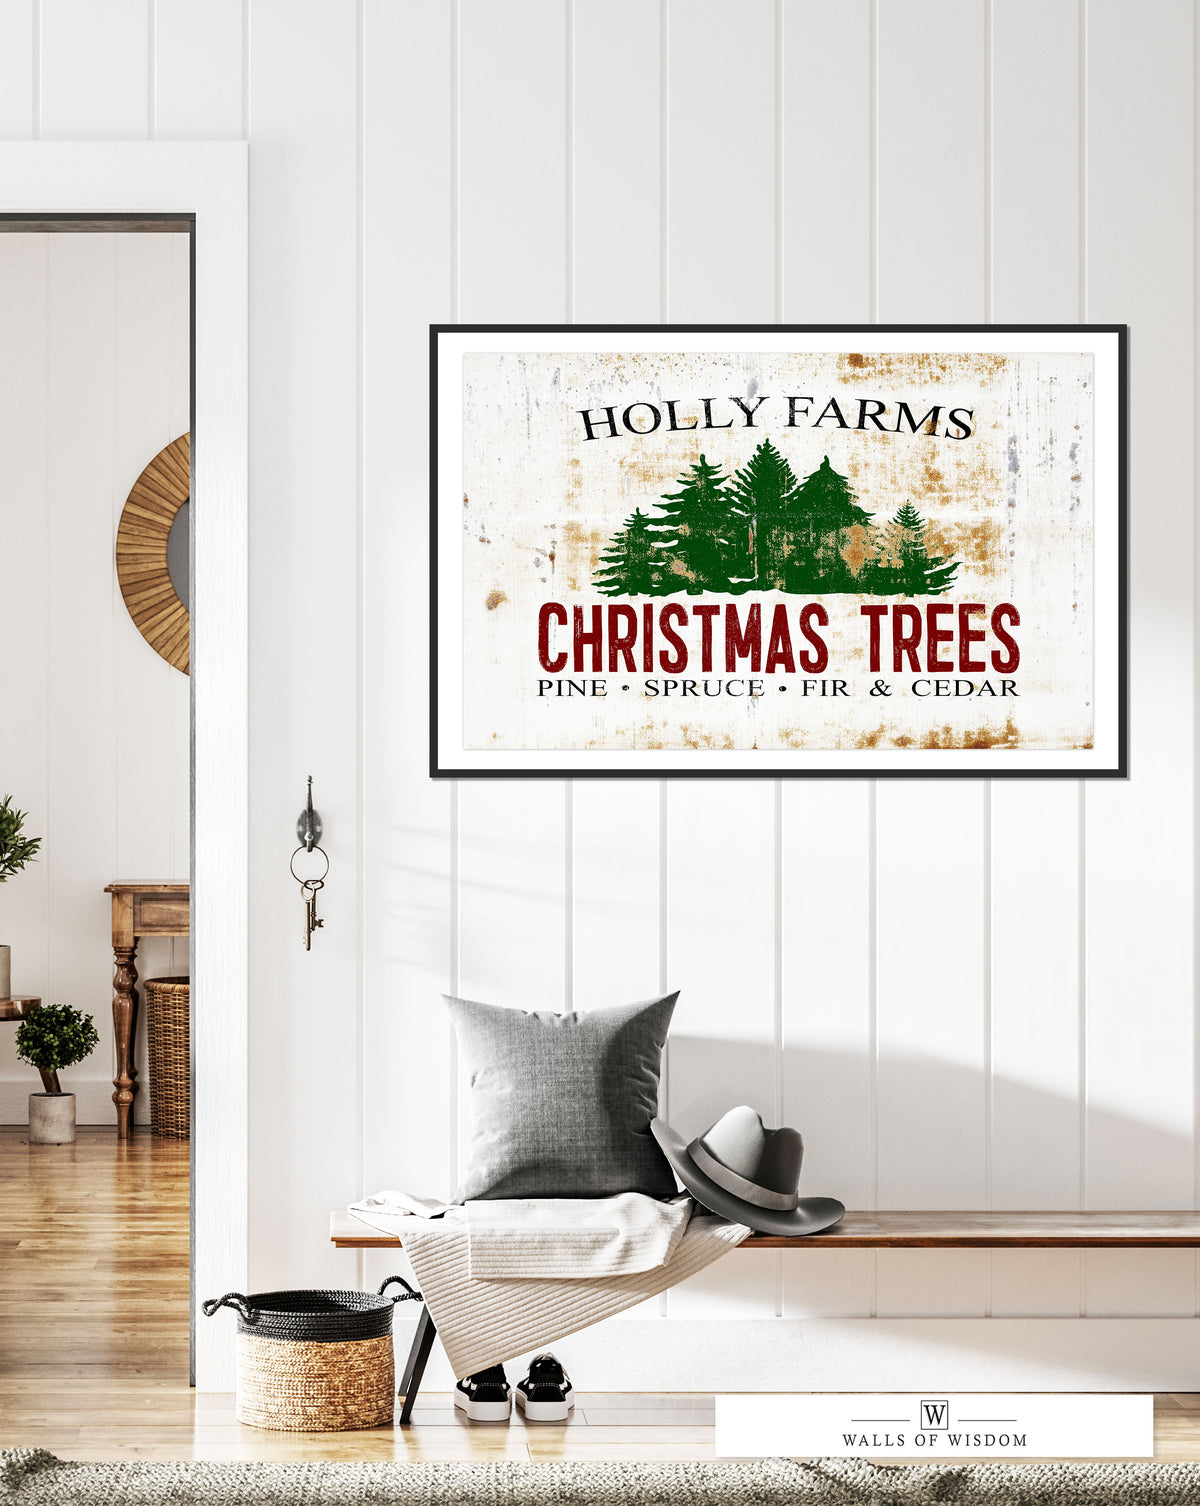 Holly Farms Vintage Christmas Tree Poster: Nostalgic Festive Wall Art for Cozy, Rustic Homes